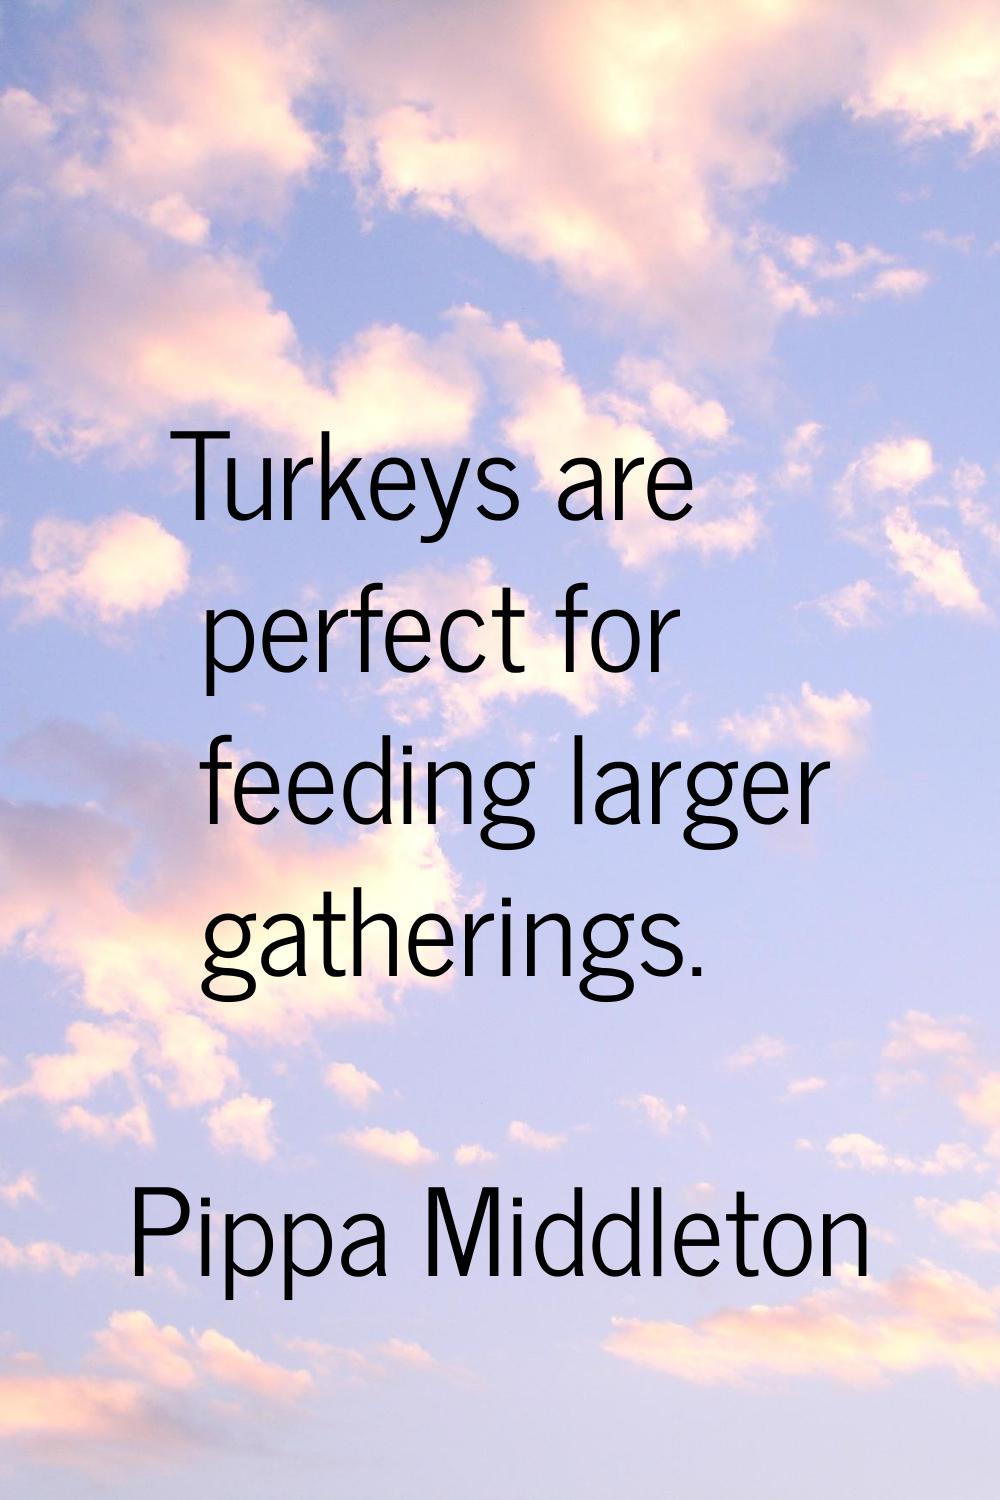 Turkeys are perfect for feeding larger gatherings.